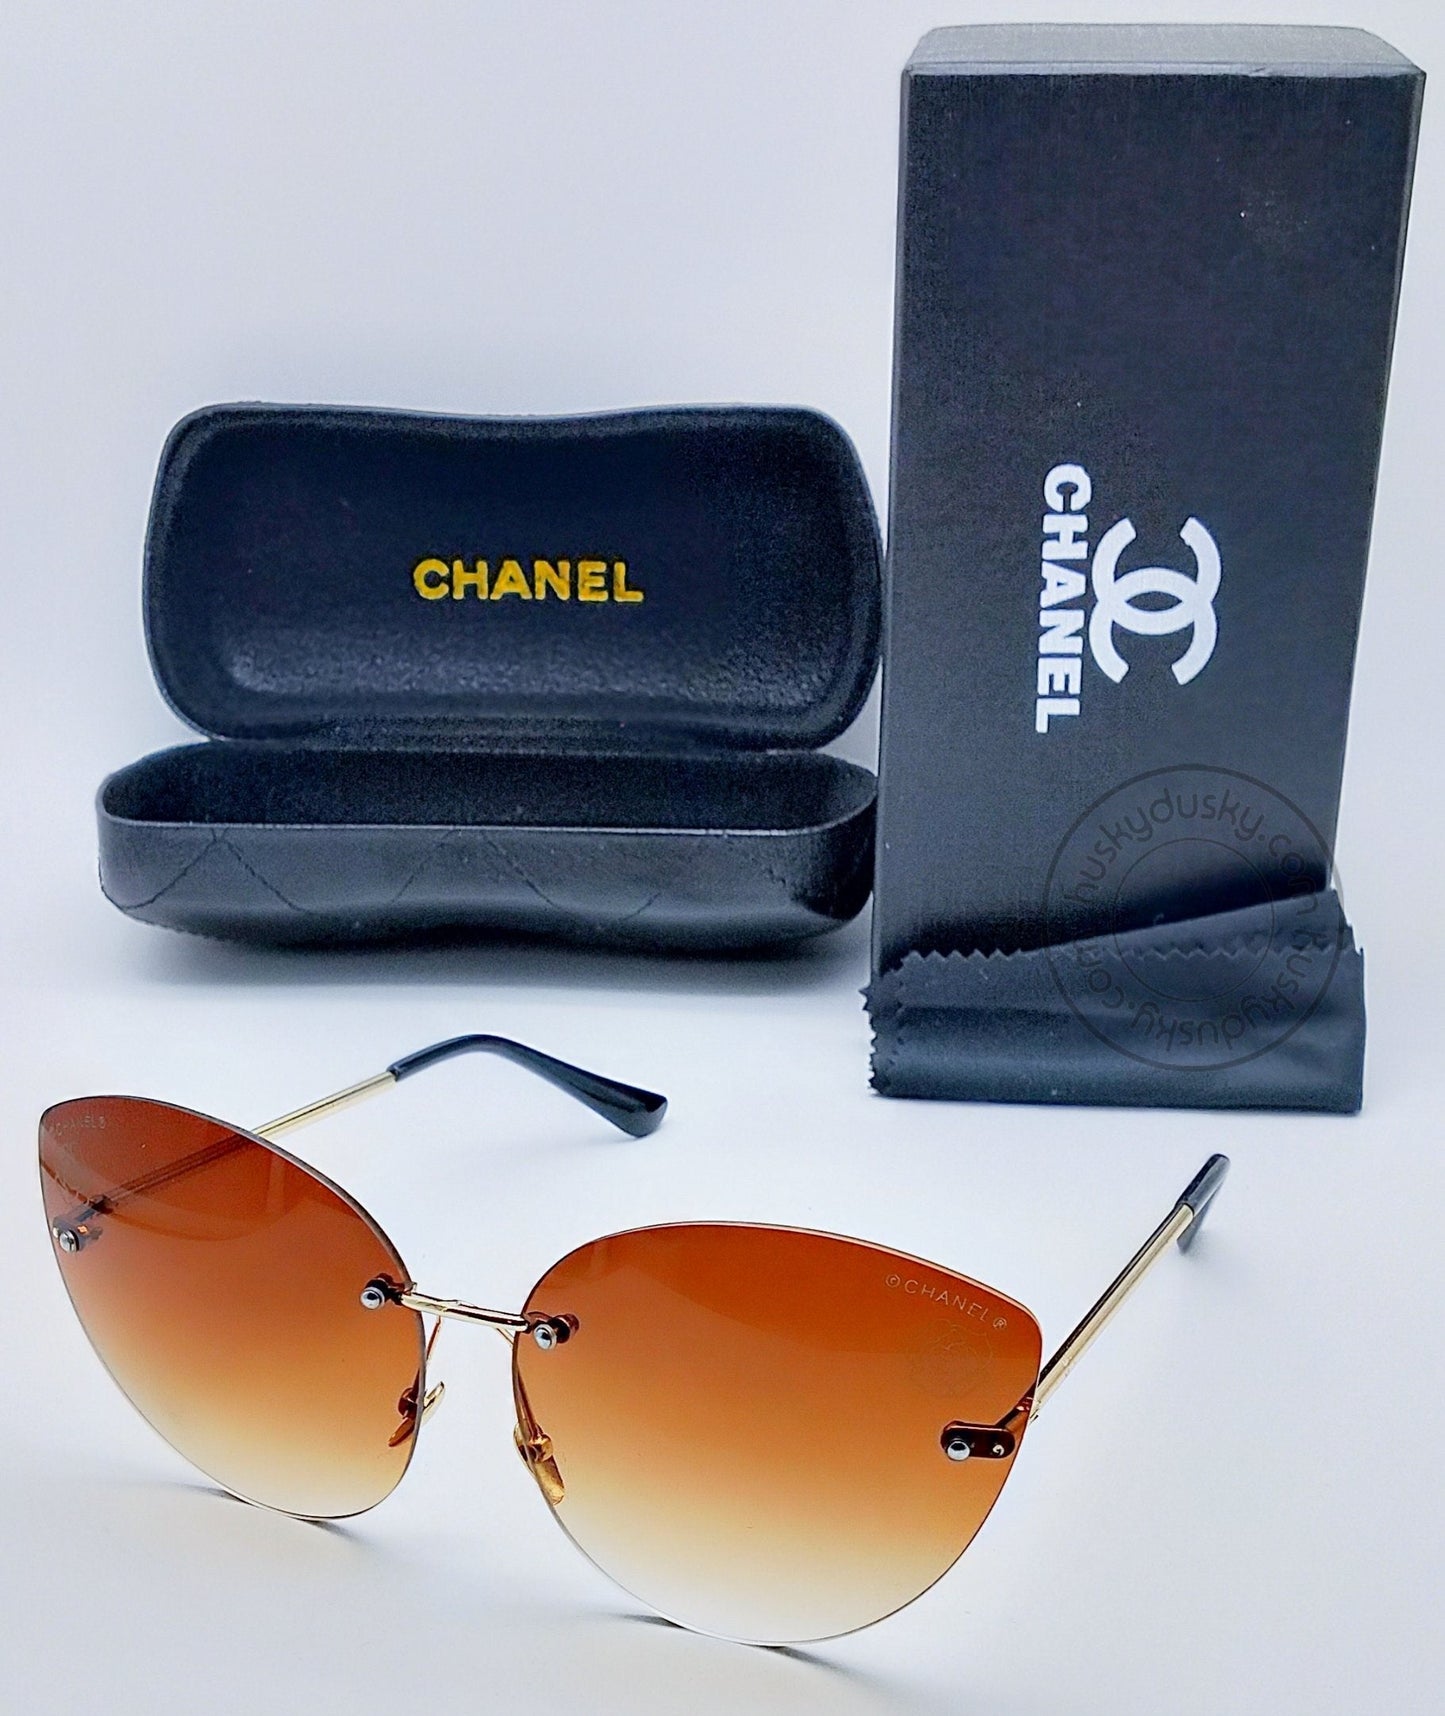 Chanel Branded Brown Glass Men's Women's Sunglass For Man Woman or Girl CHA-96 Gold And Black Design Stick Gift Sunglass